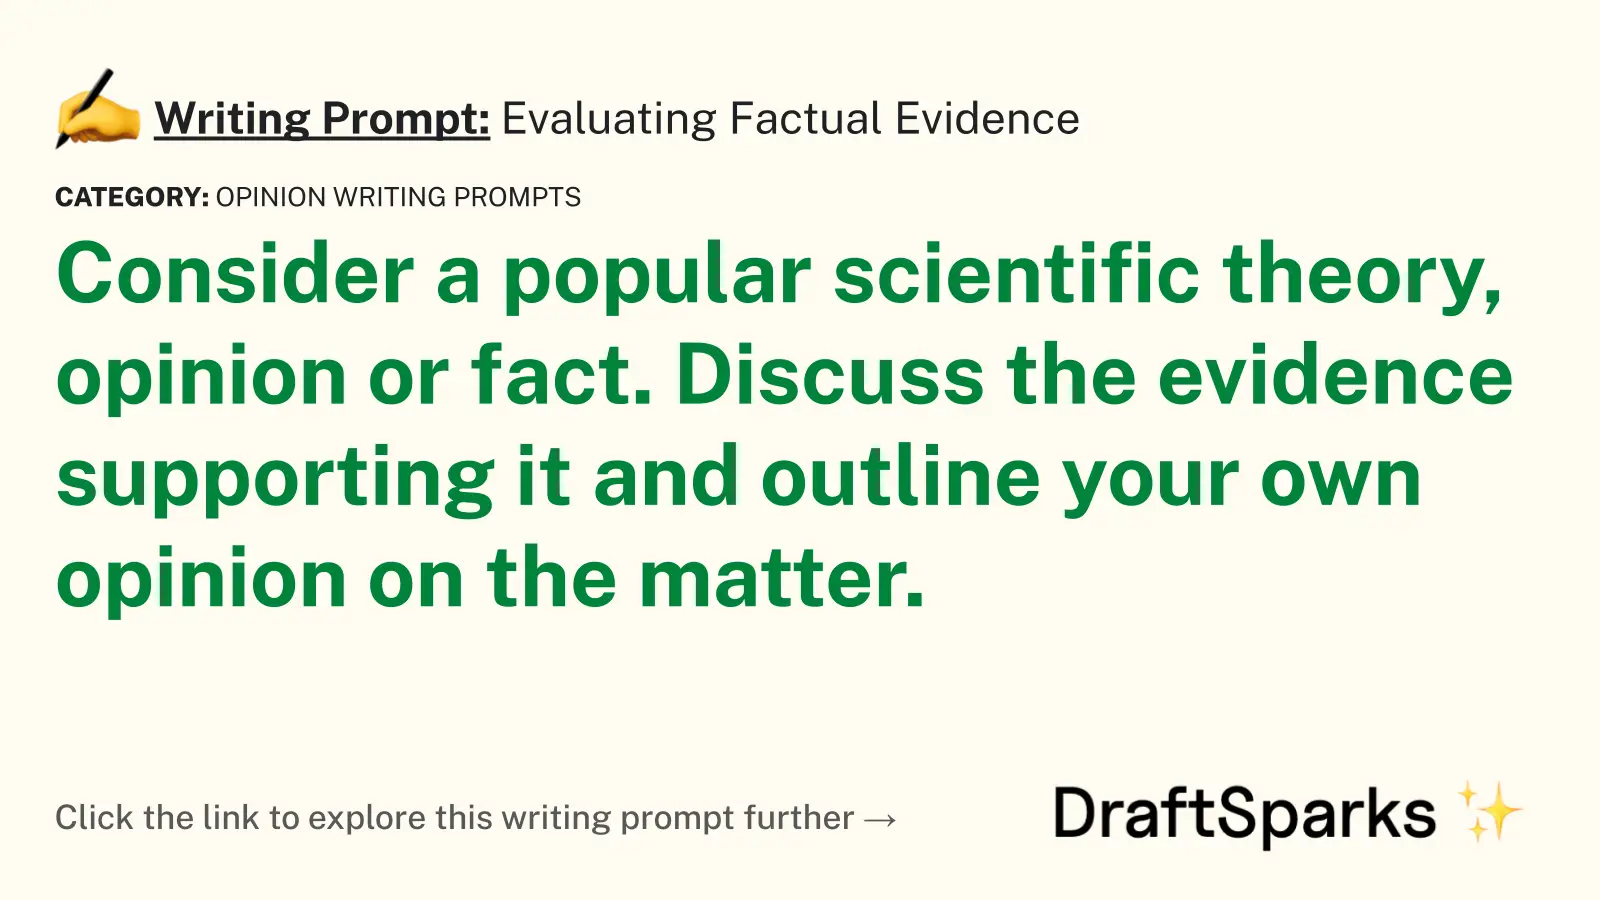 Evaluating Factual Evidence